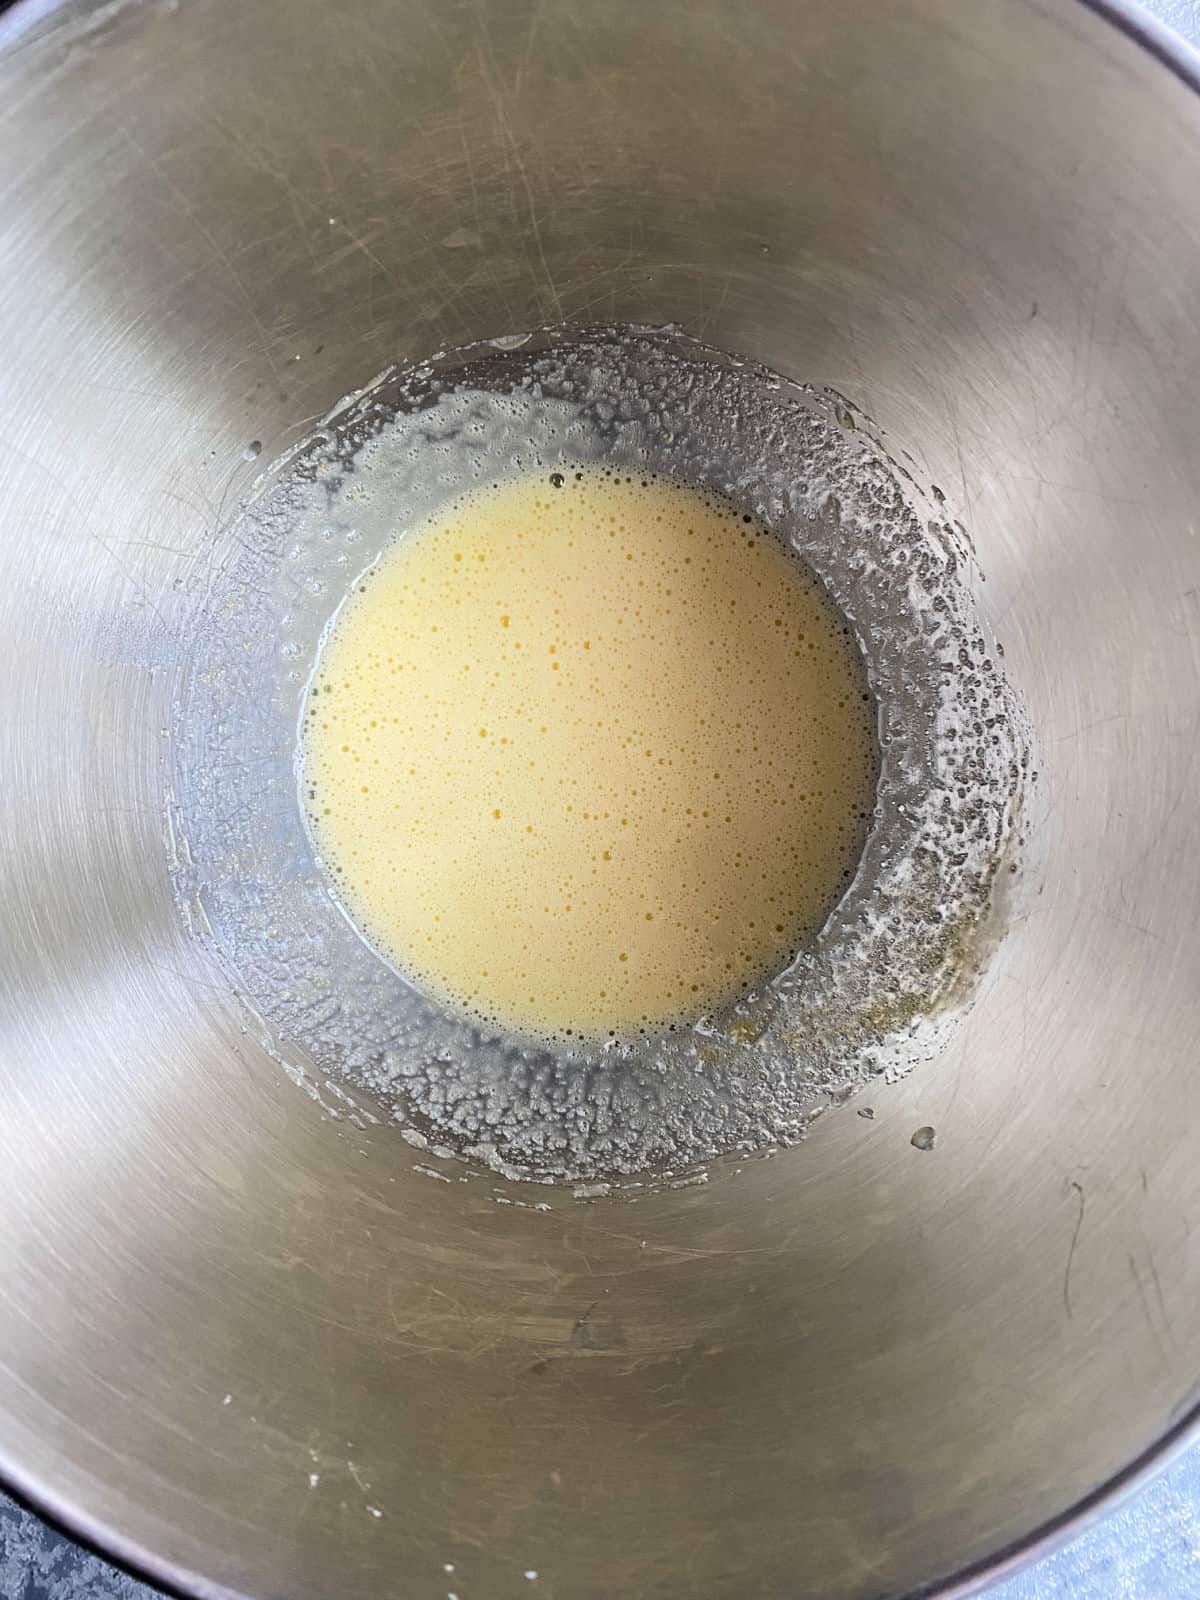 Whisking eggs and sugar